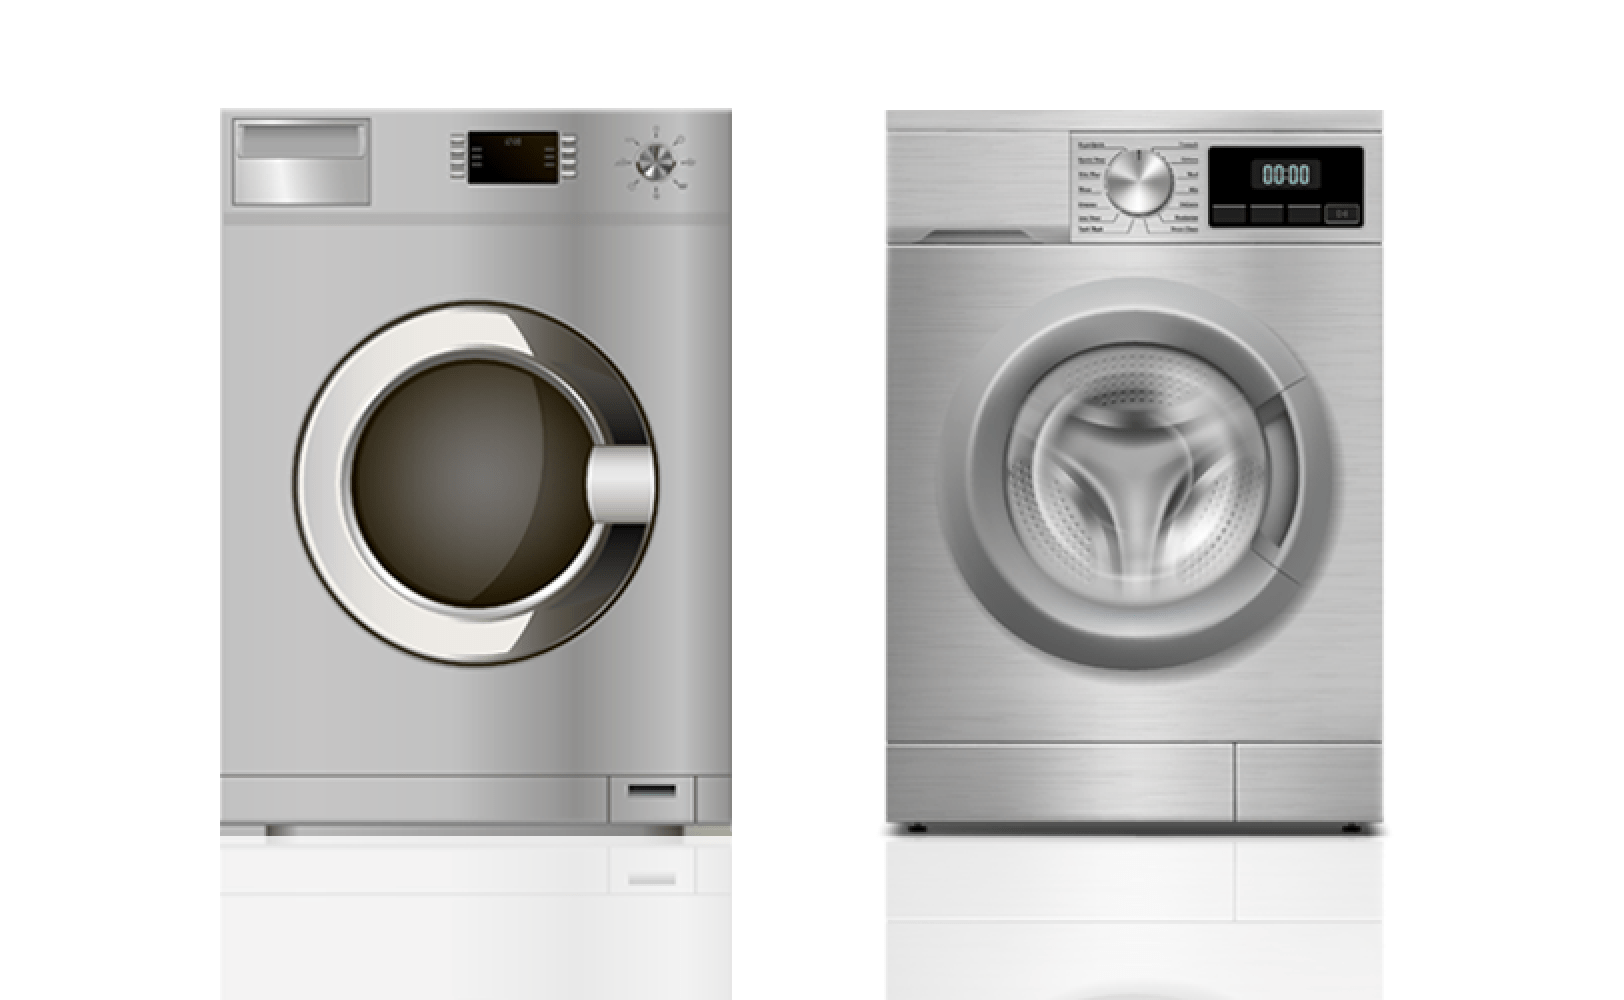 Washer Repair Service in Ken Caryl